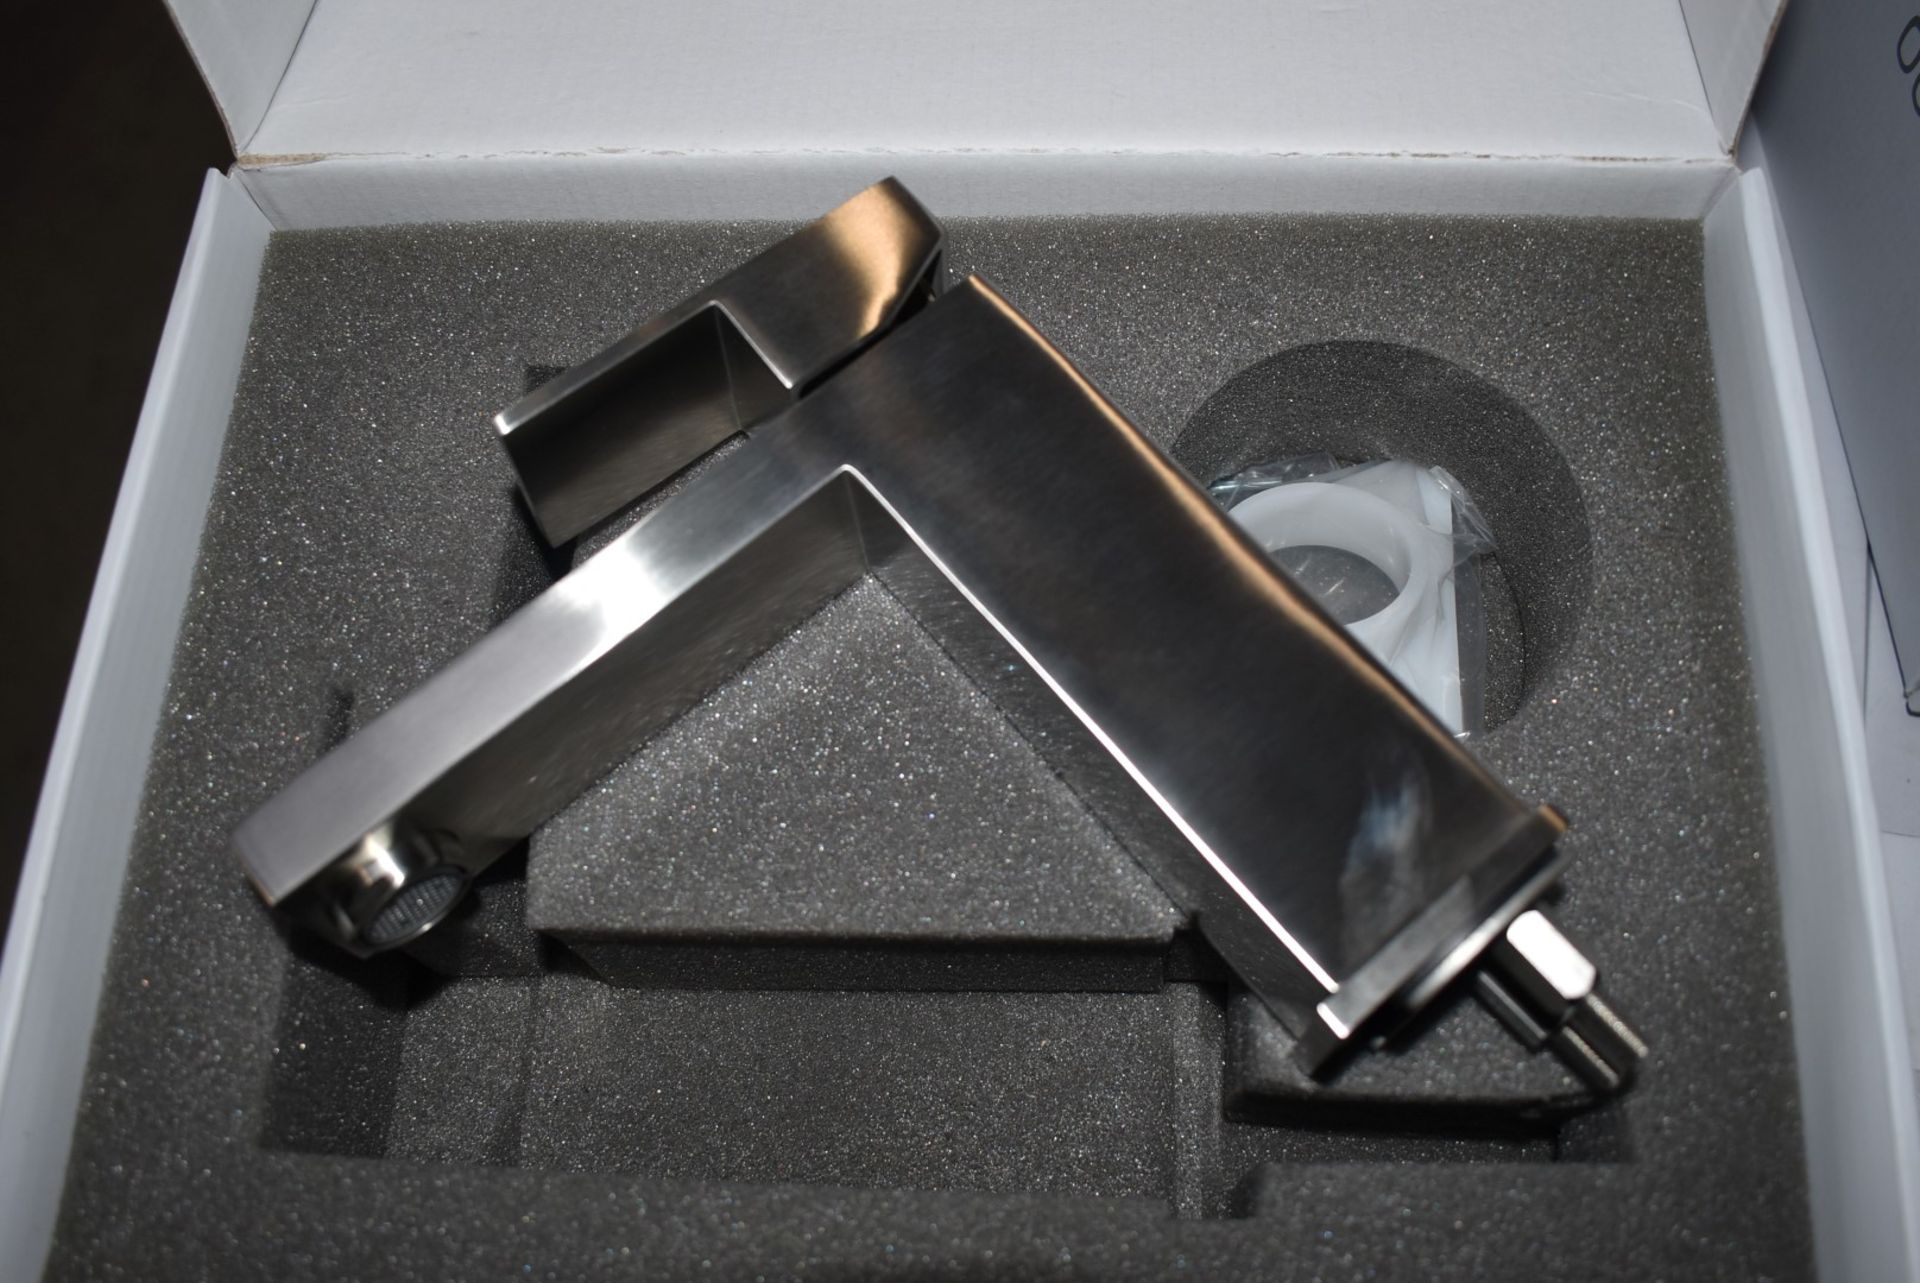 1 x Stonearth 'Metro' Stainless Steel Basin Mixer Tap - Brand New & Boxed - CL713 - RRP £245 - - Image 5 of 8